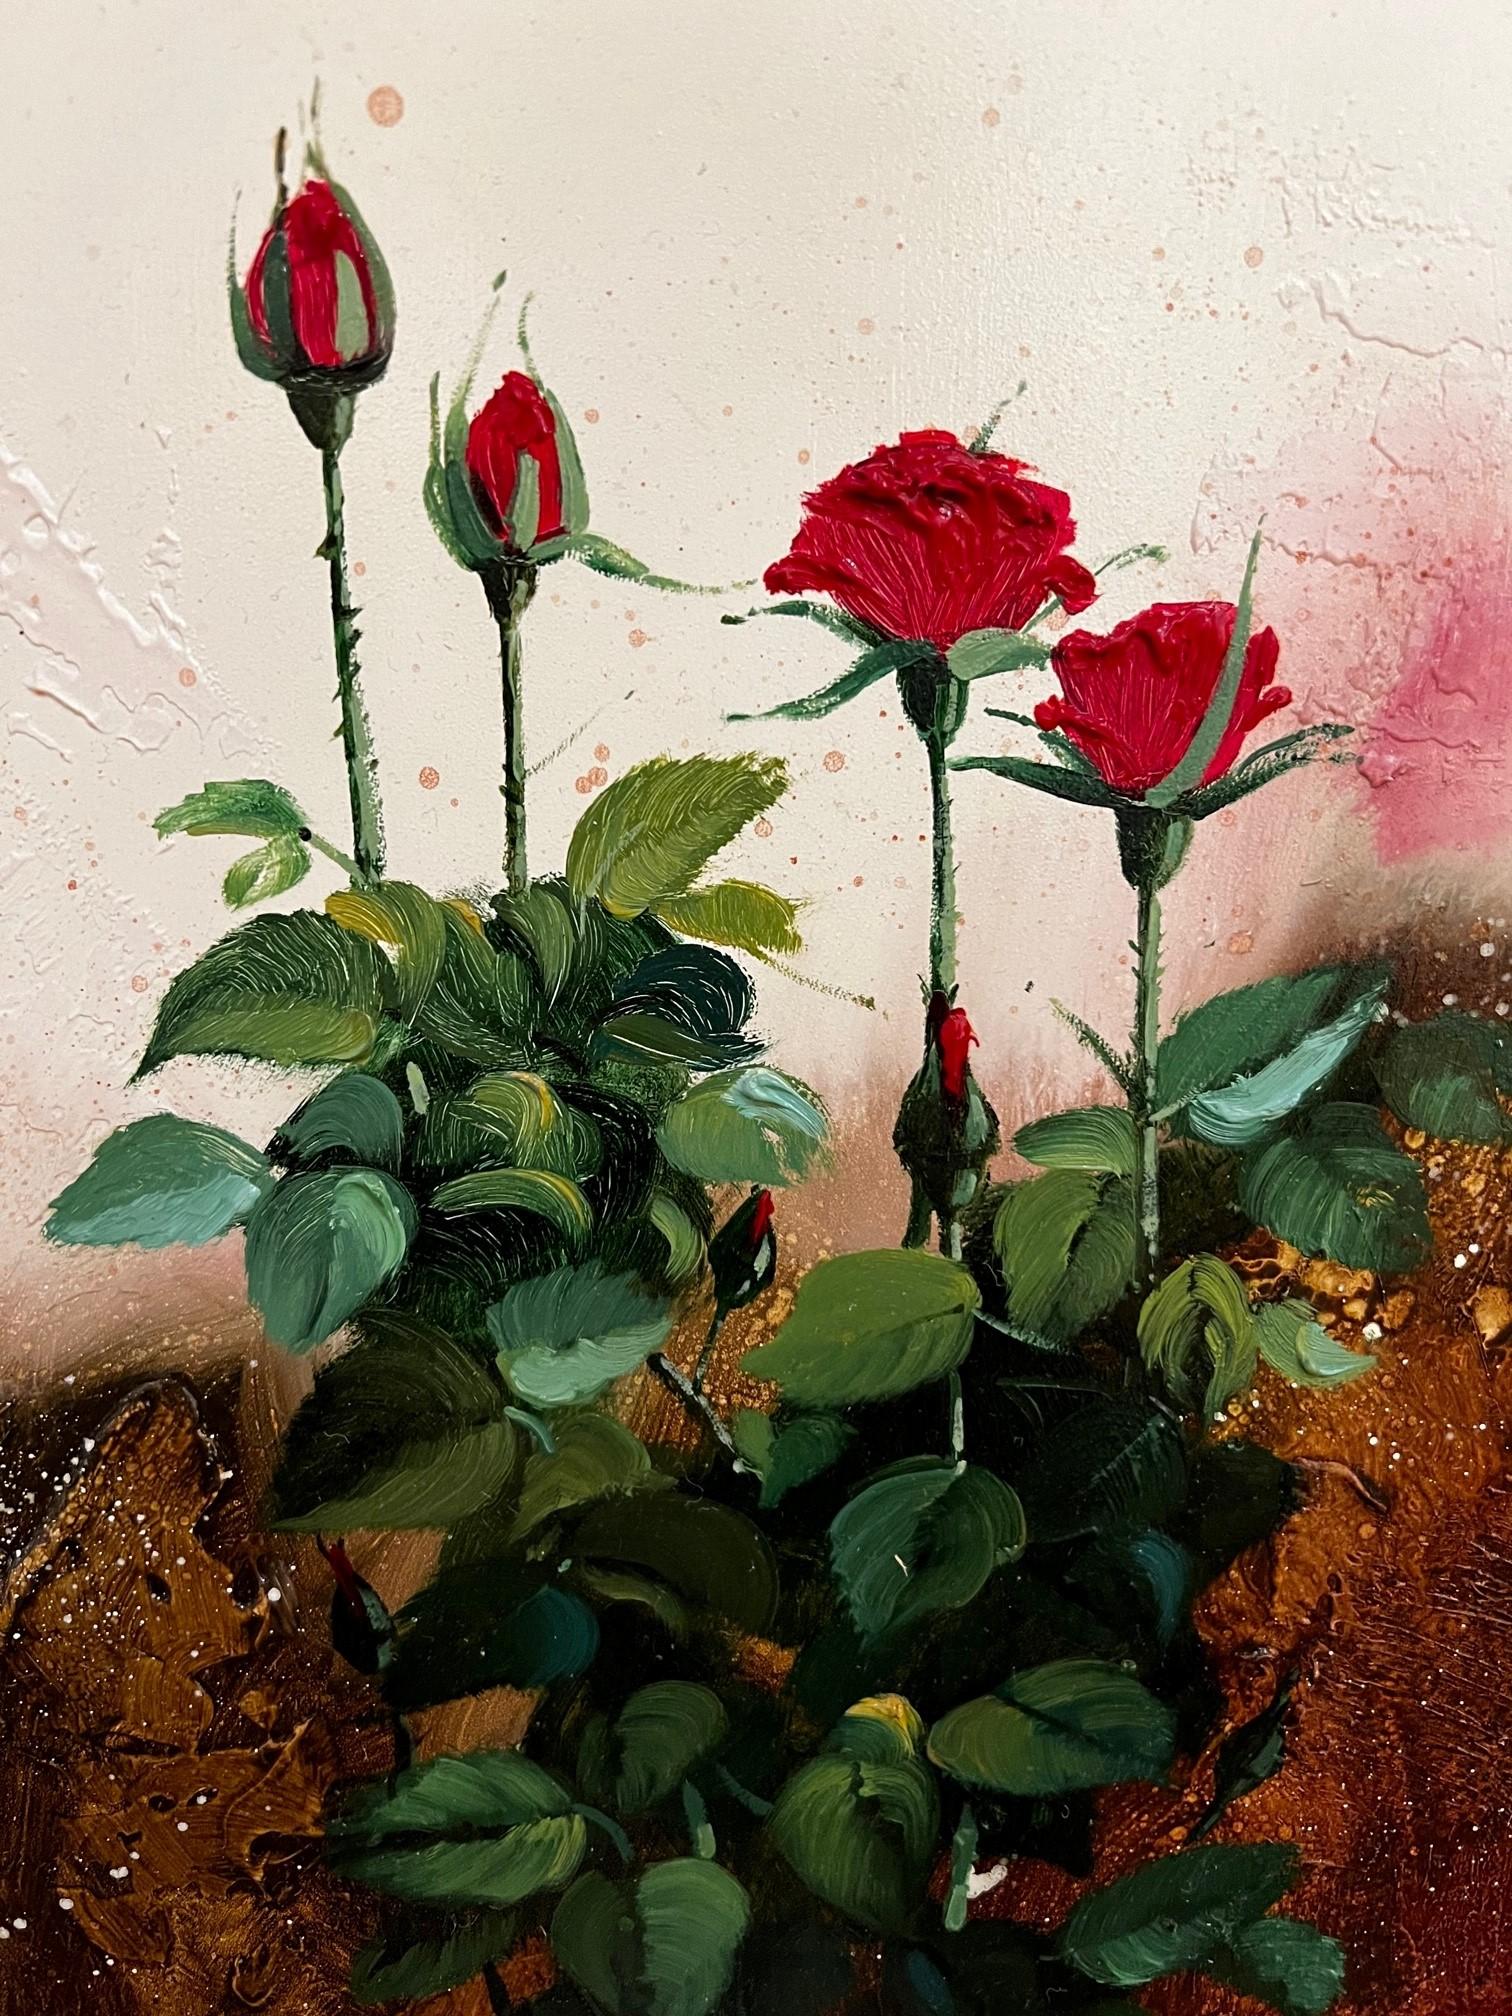 Roses - Impressionist Painting by Fernando Alcaraz